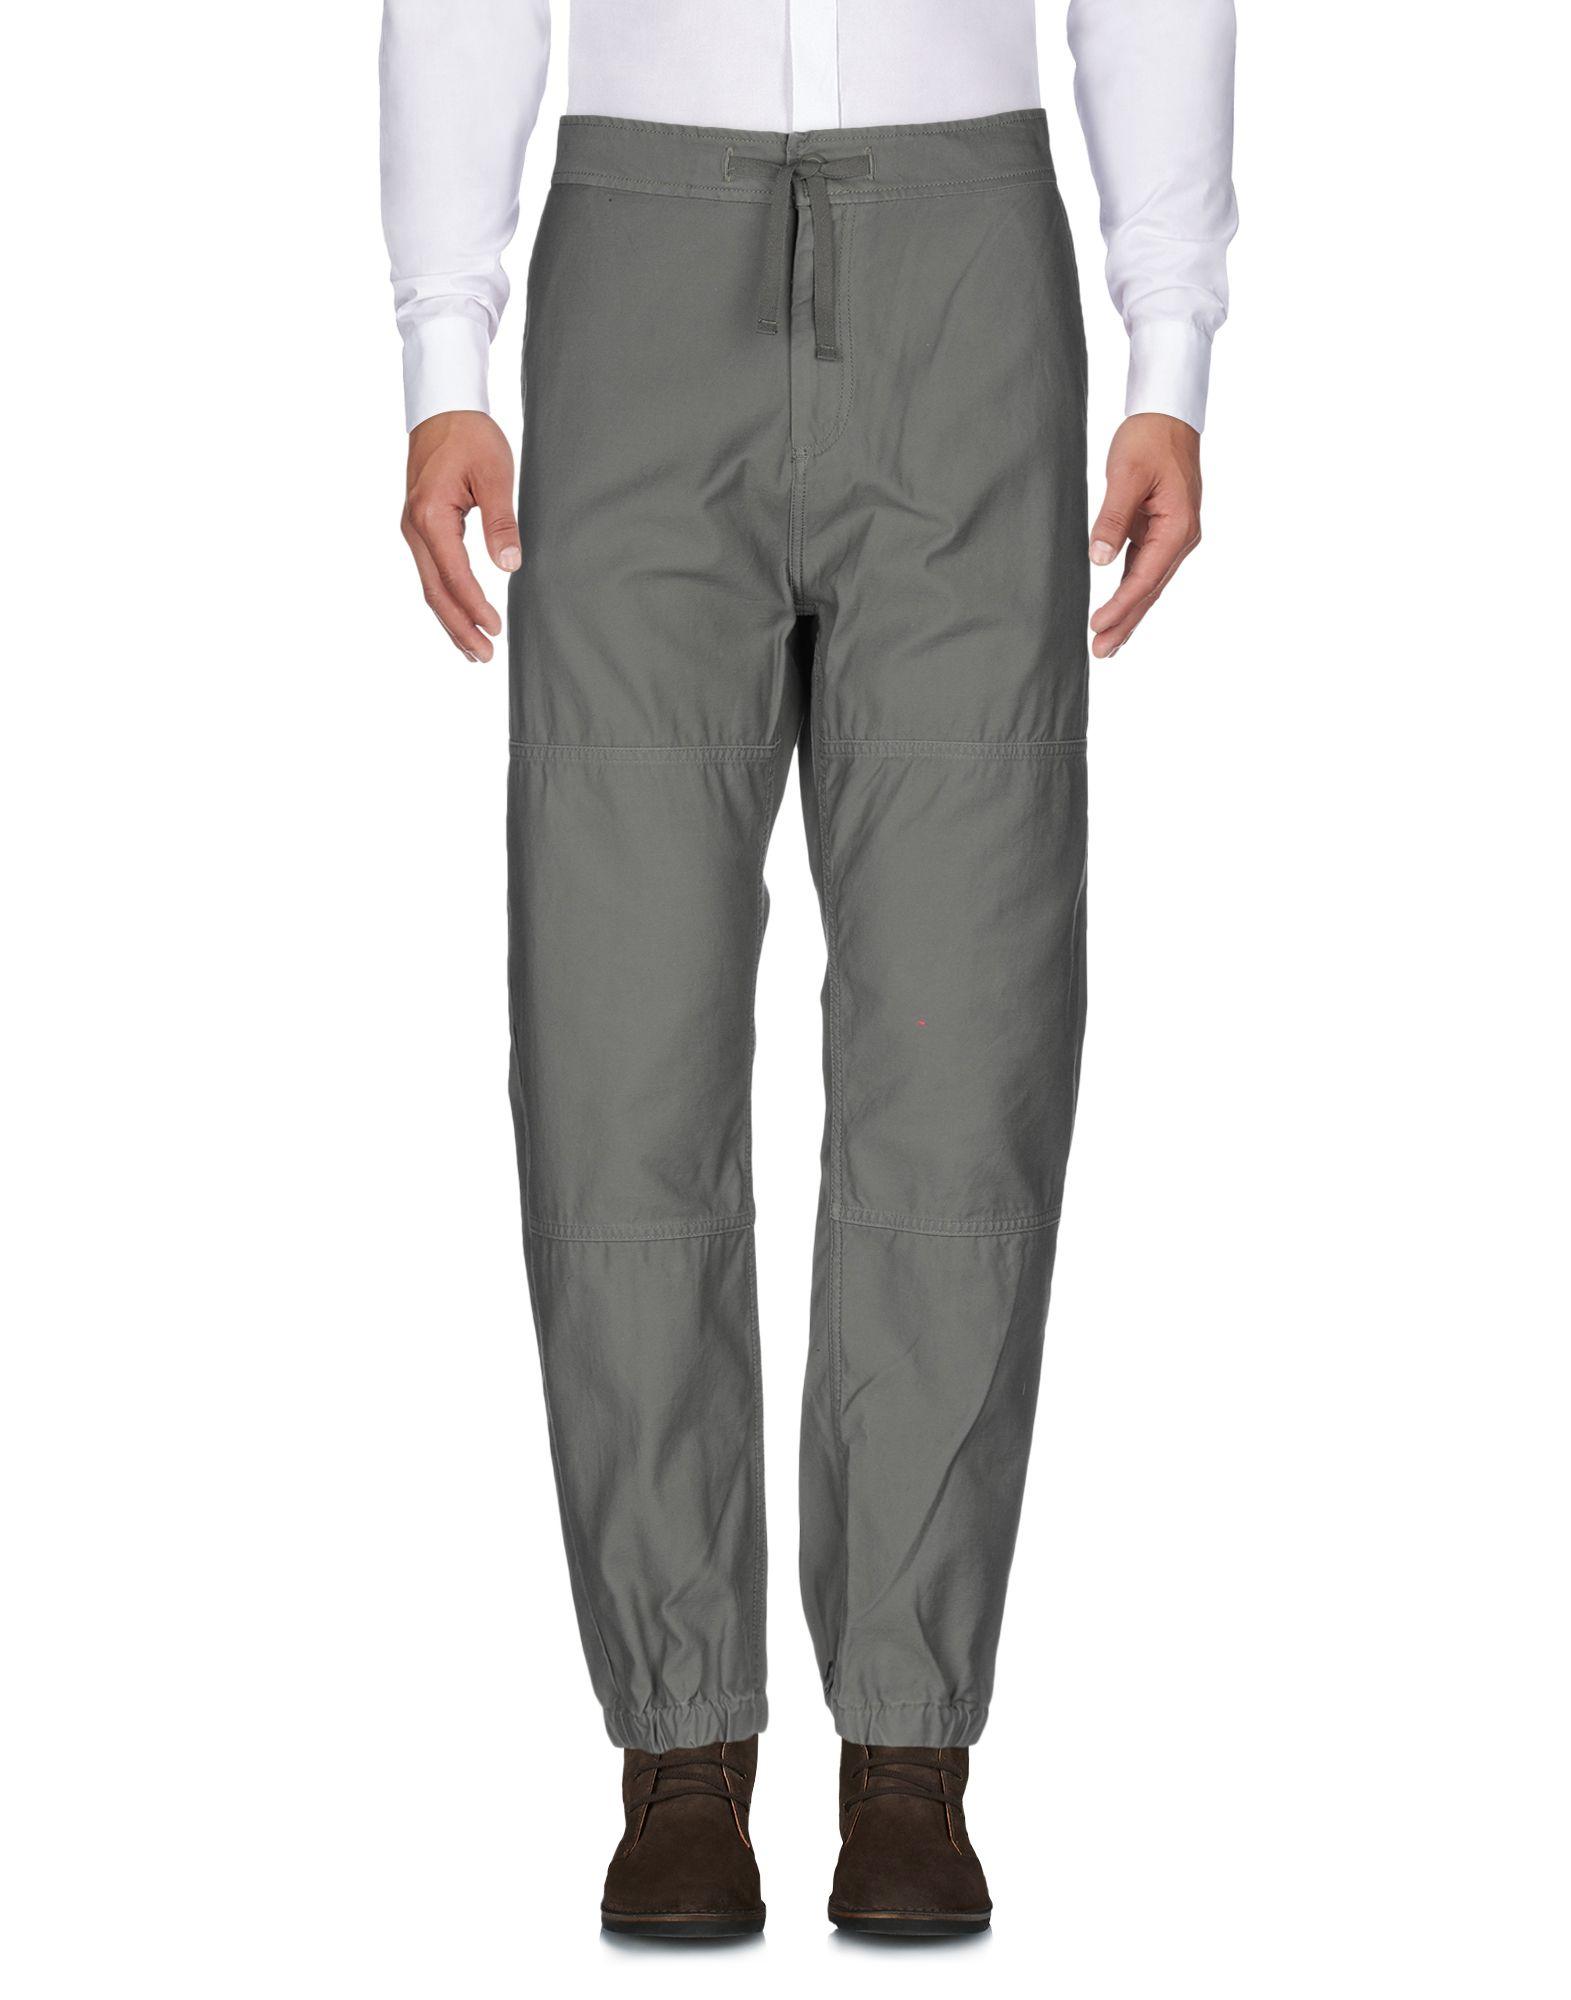 Carhartt Cotton Casual Trouser in Military Green (Gray) for Men - Lyst